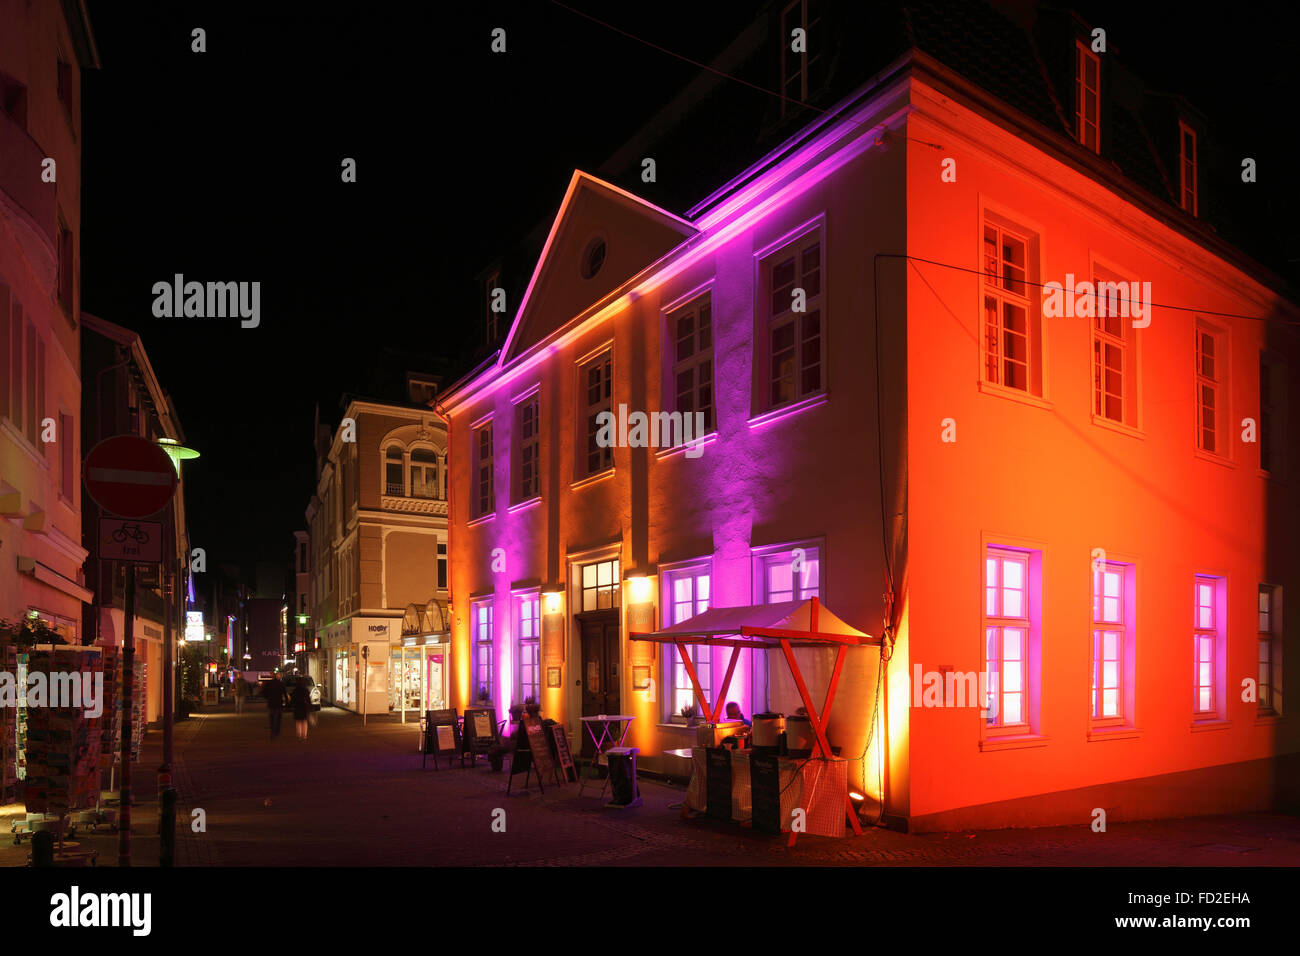 D-Recklinghausen, Ruhr area, Westphalia, North Rhine-Westphalia, NRW, "Recklinghausen leuchtet", festival illumination in the historic downtown, Linen Weaver House Wueller in the Grosse Geldstrasse, residential building, classicism Stock Photo